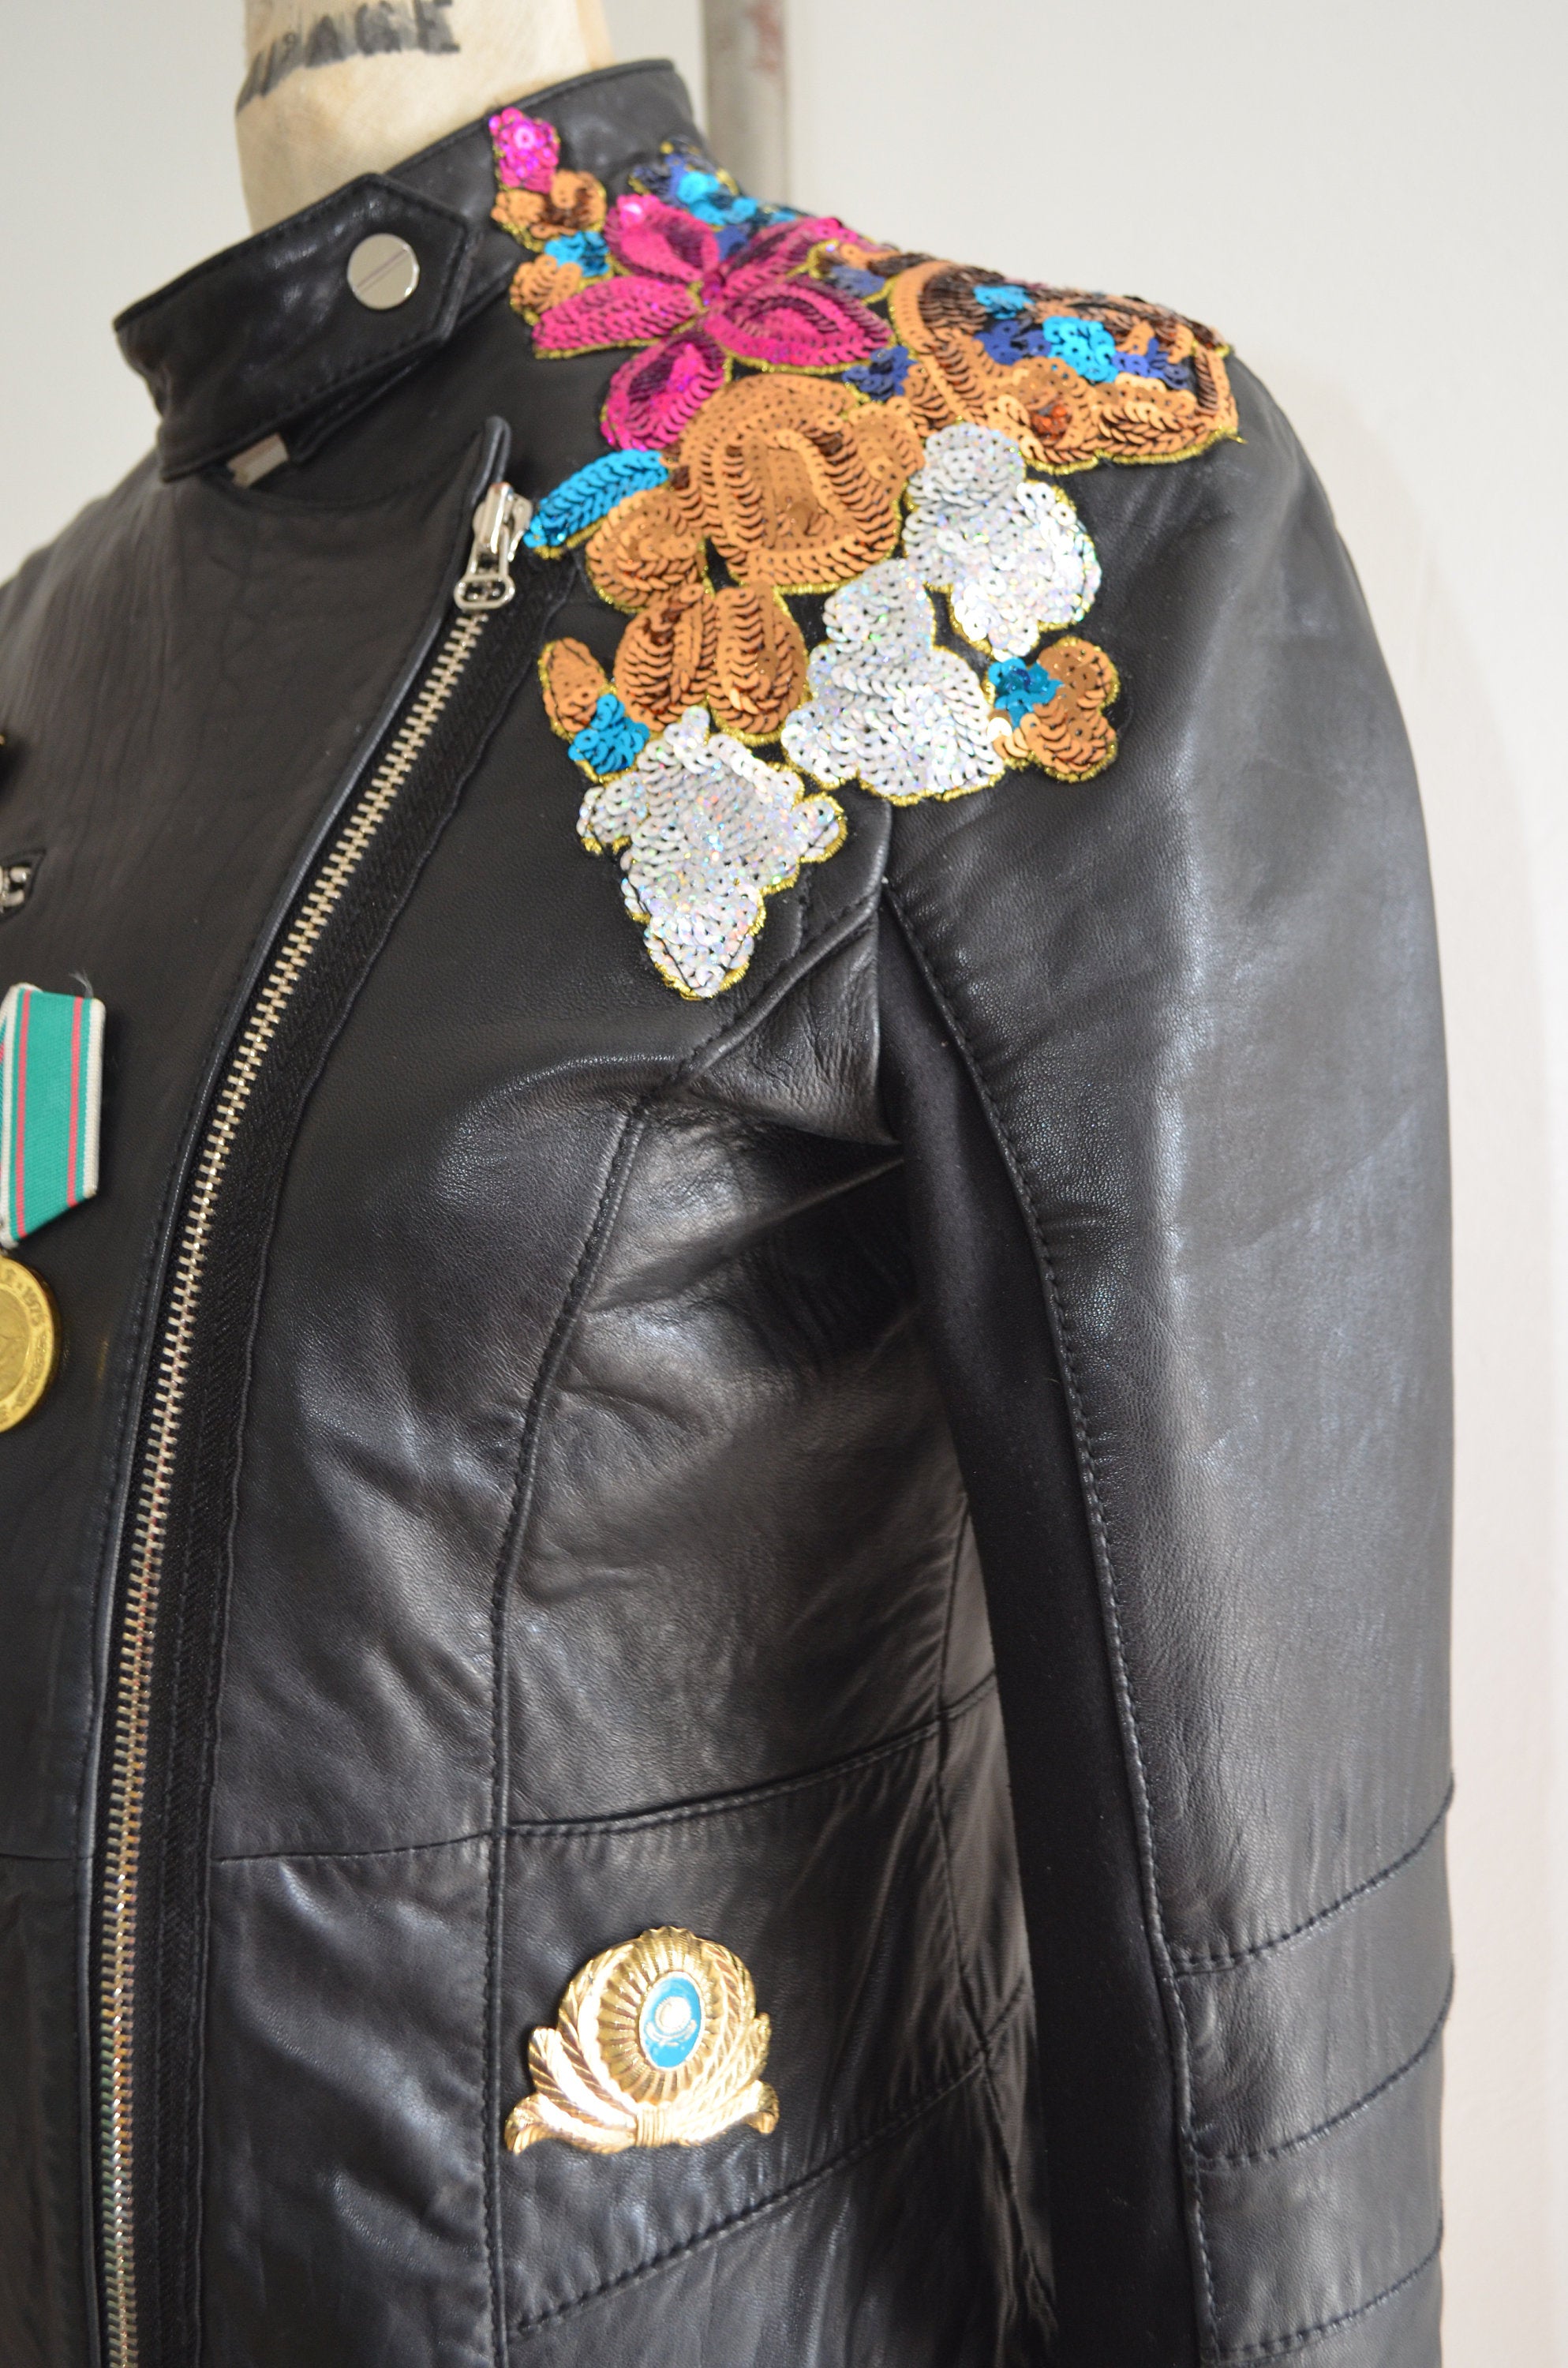 1990S Reworked Leather Moto Bike Jacket Blazer Multicolor Sequined Floral Military Medals